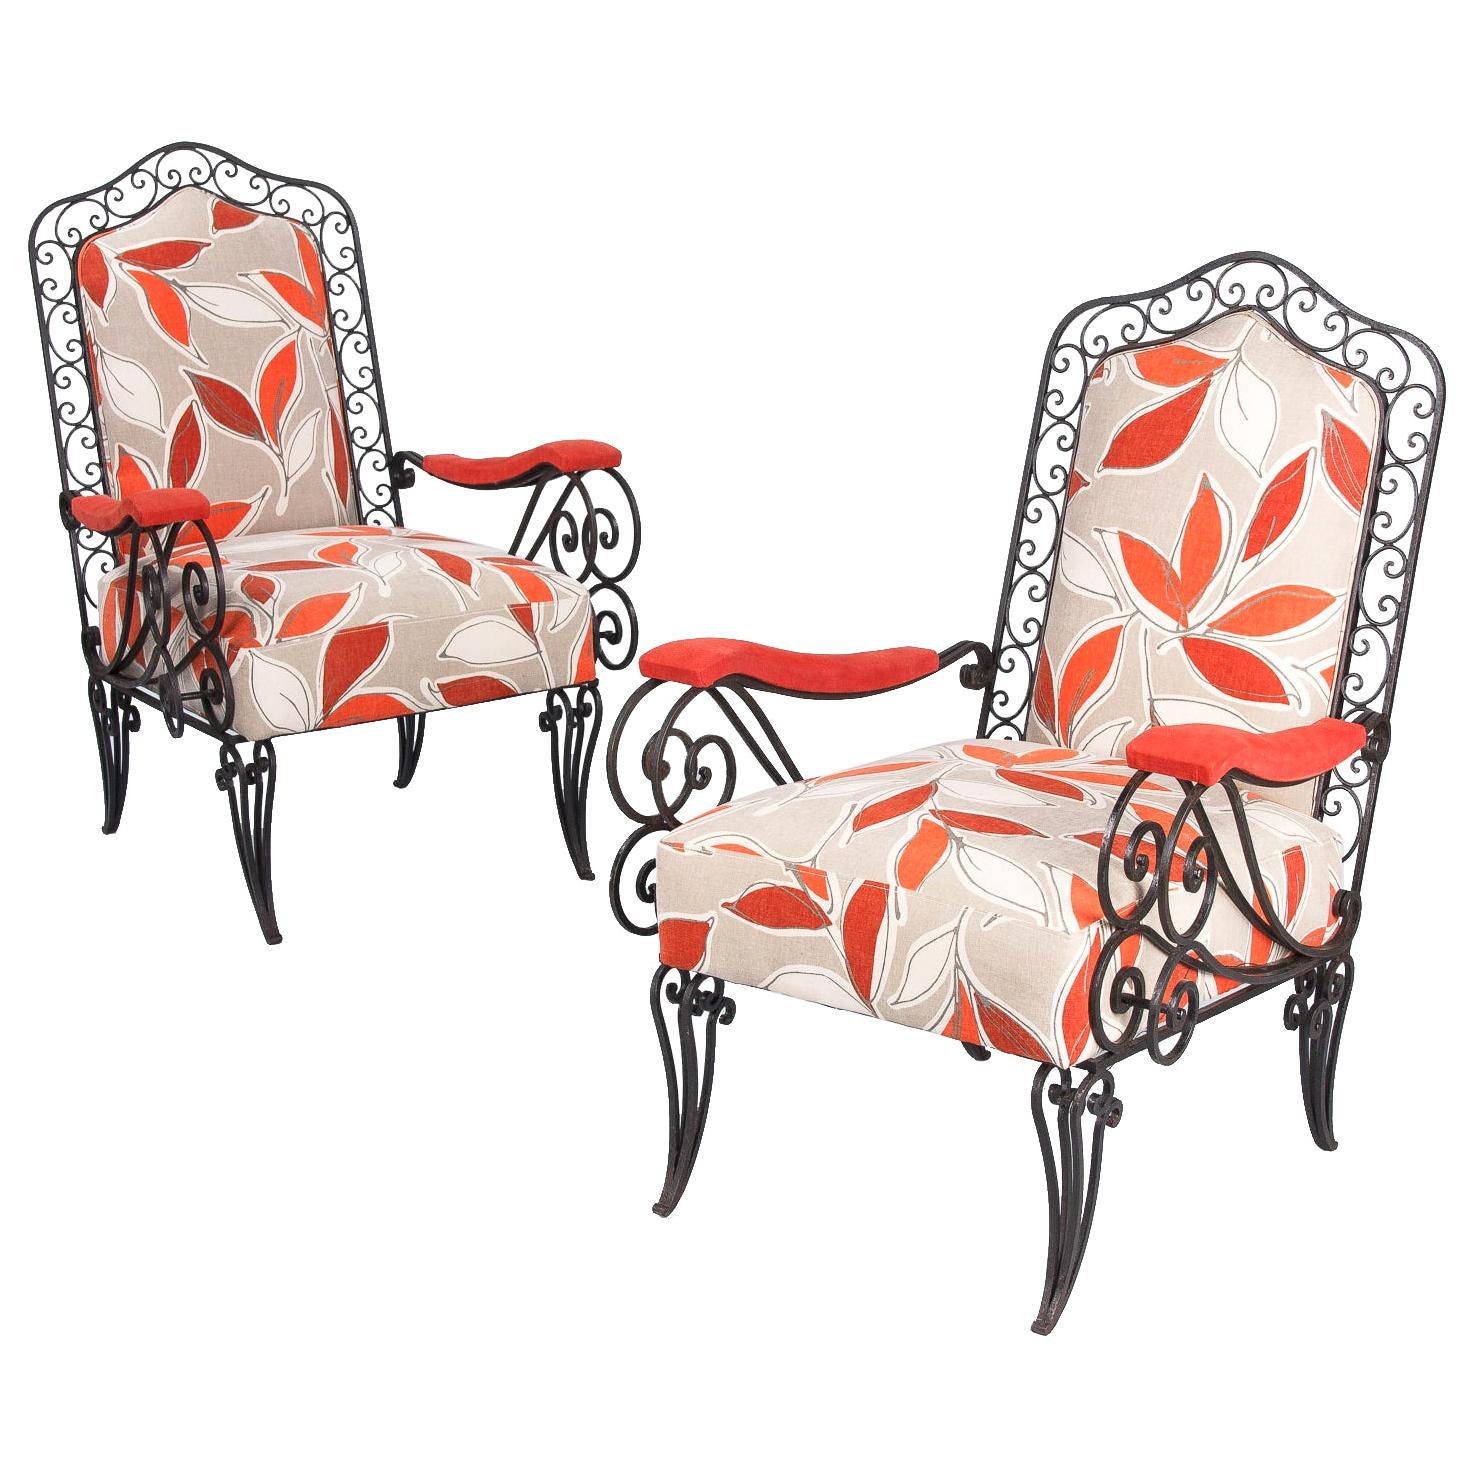 Pair of French Wrought Iron Armchairs with Red Leaf Upholstery, 1940s